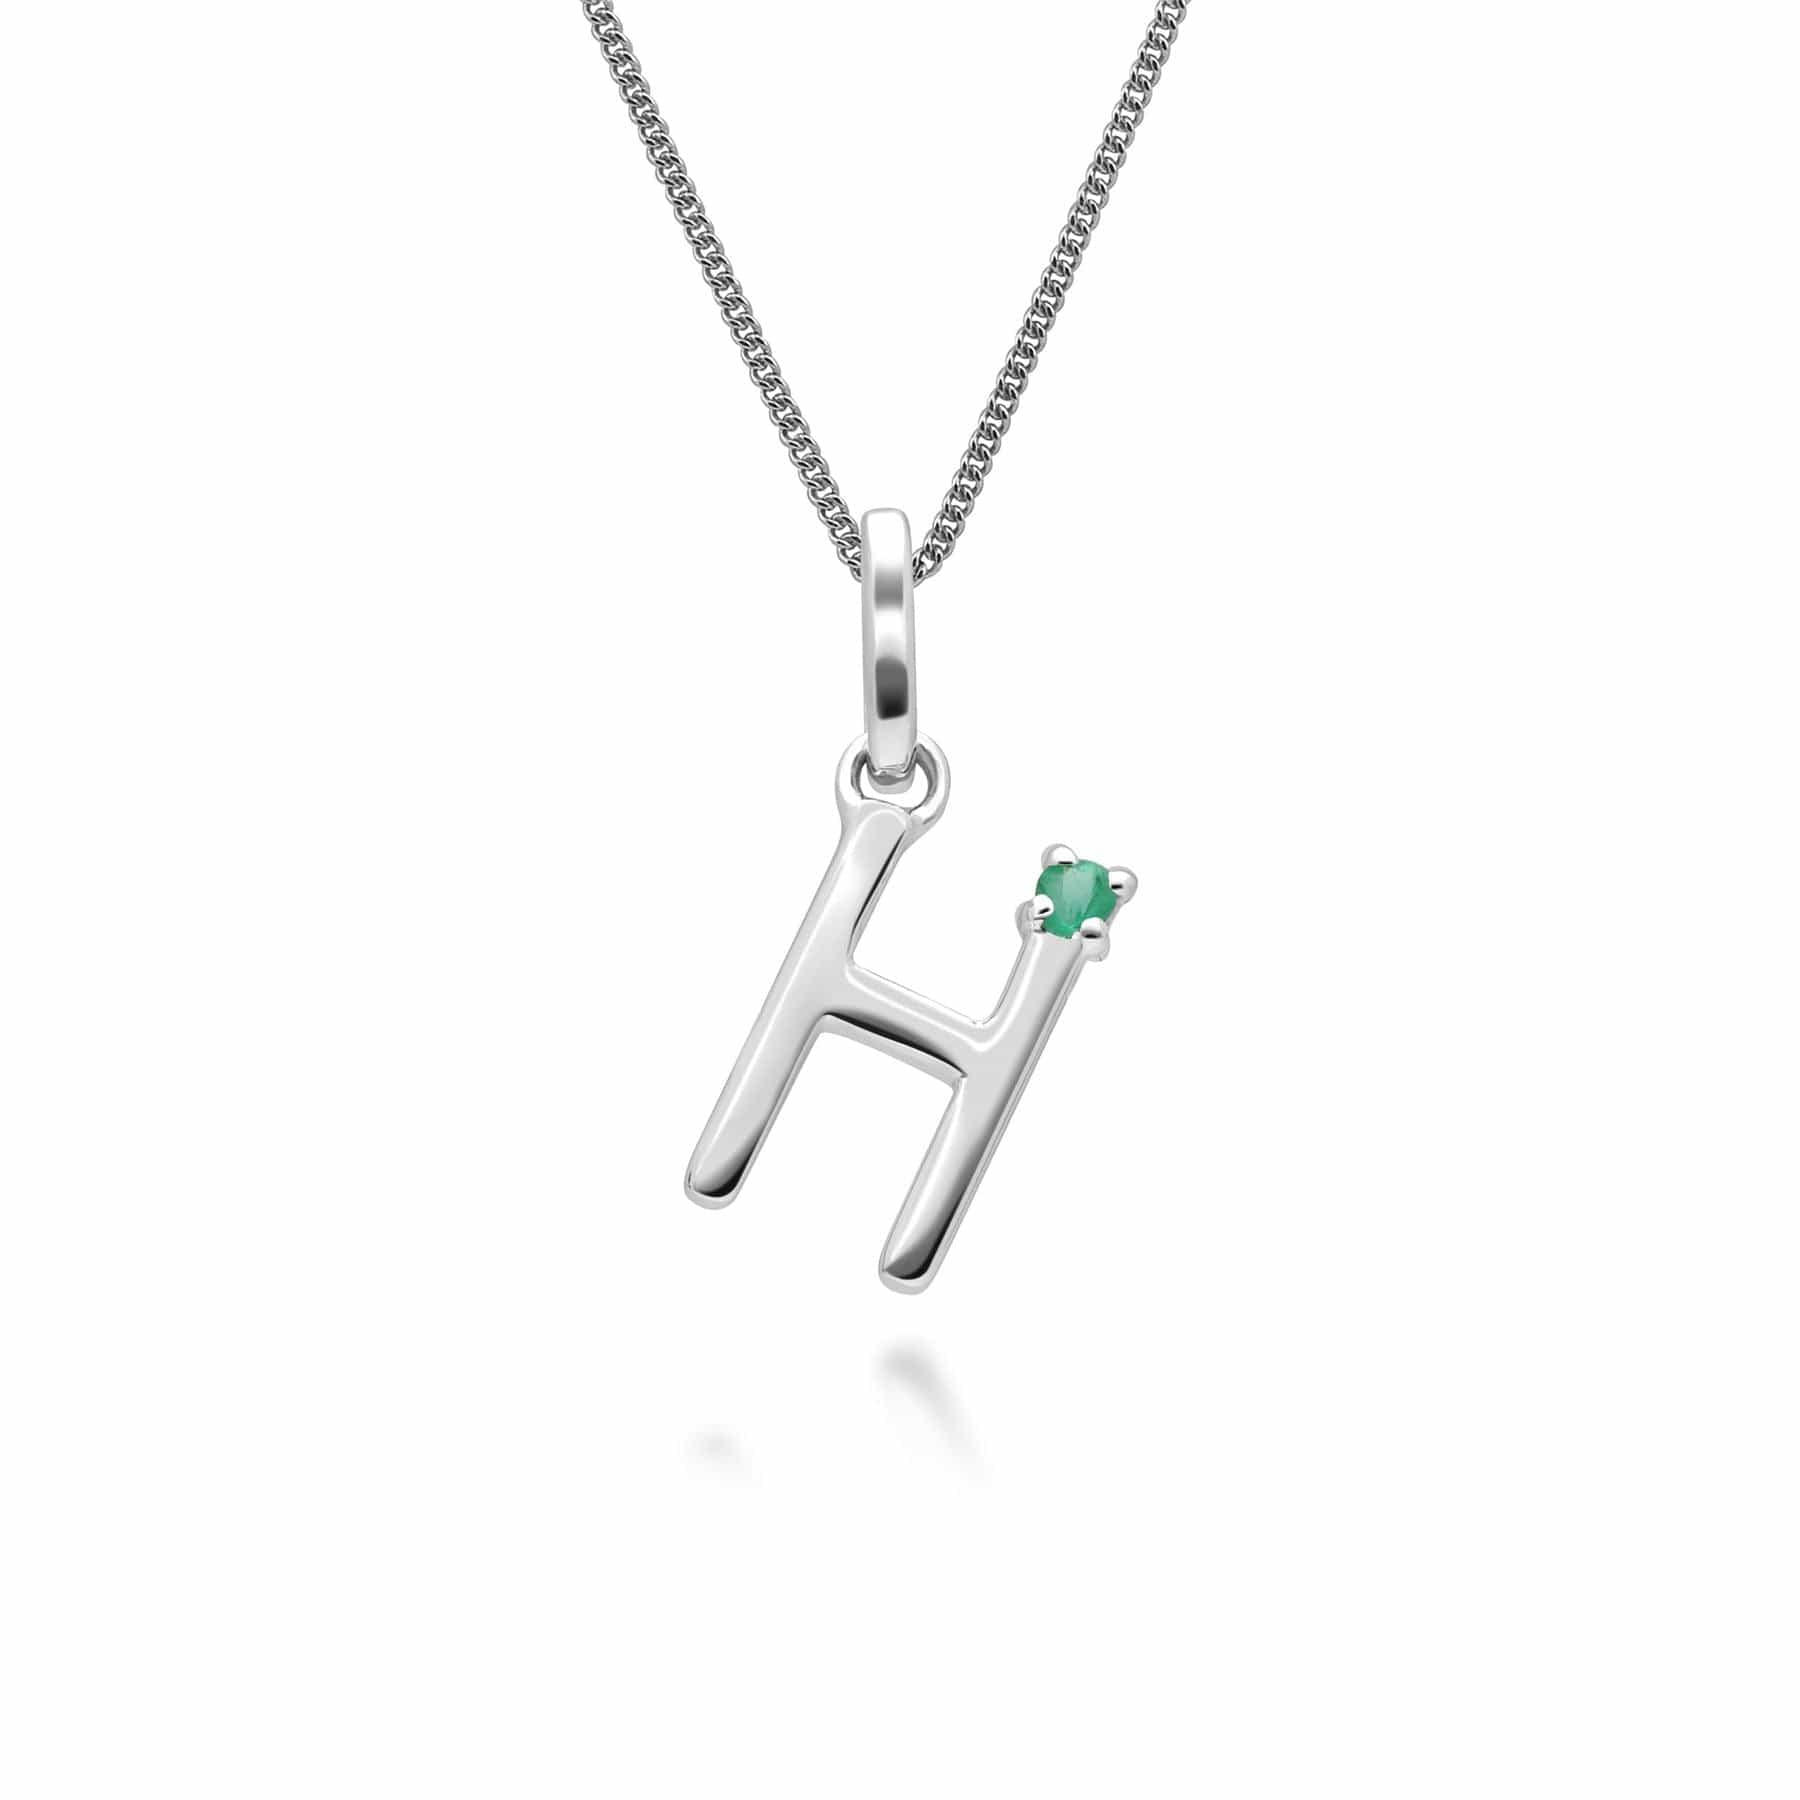 162P0248019 Initial Emerald Letter Charm Necklace in 9ct White Gold 9